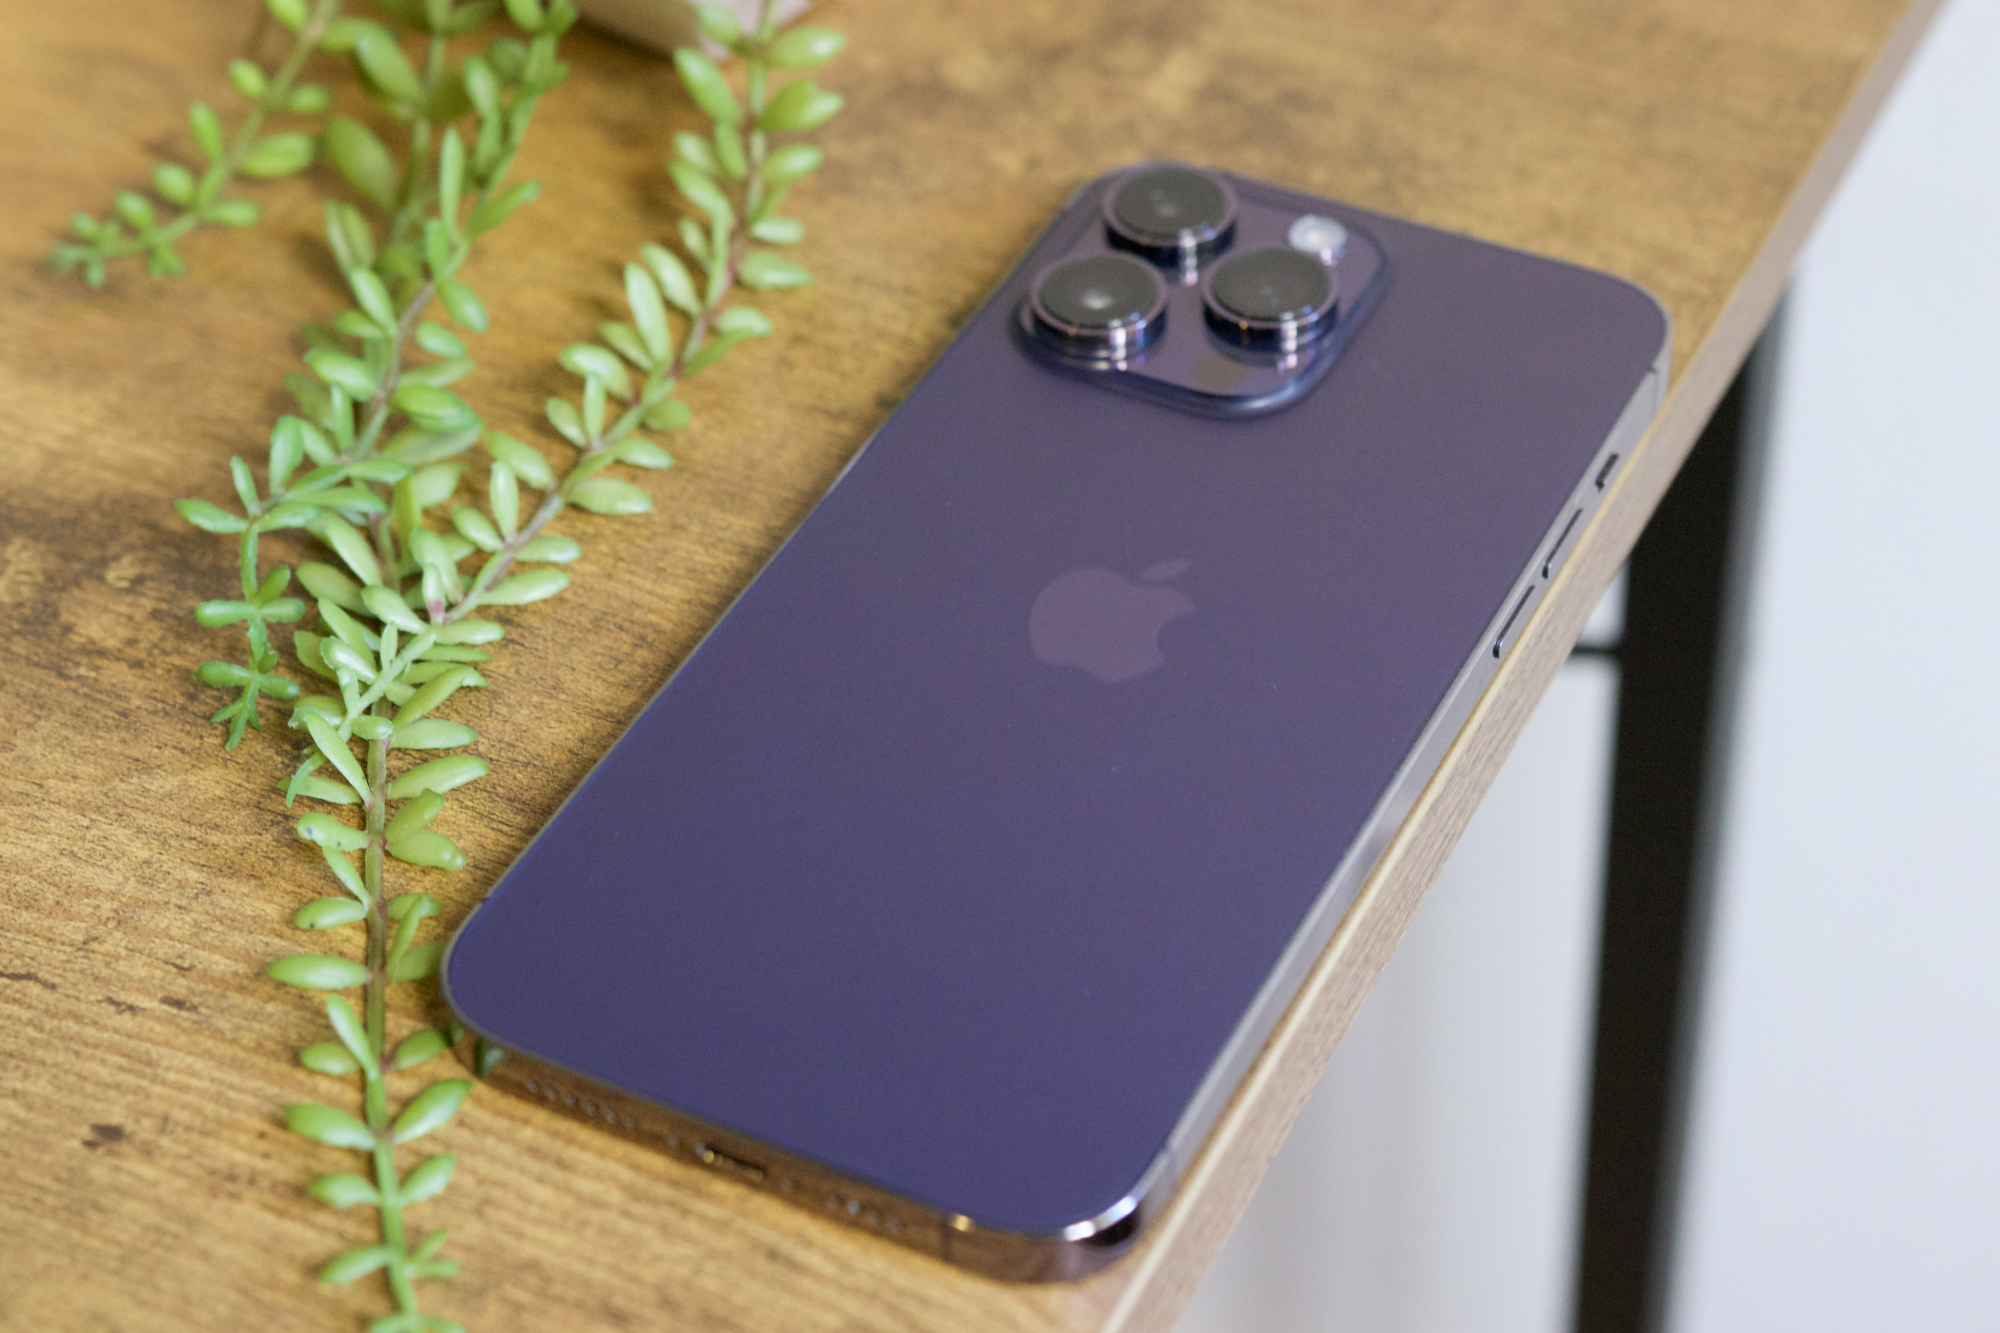 Apple iPhone 14 Pro Max review